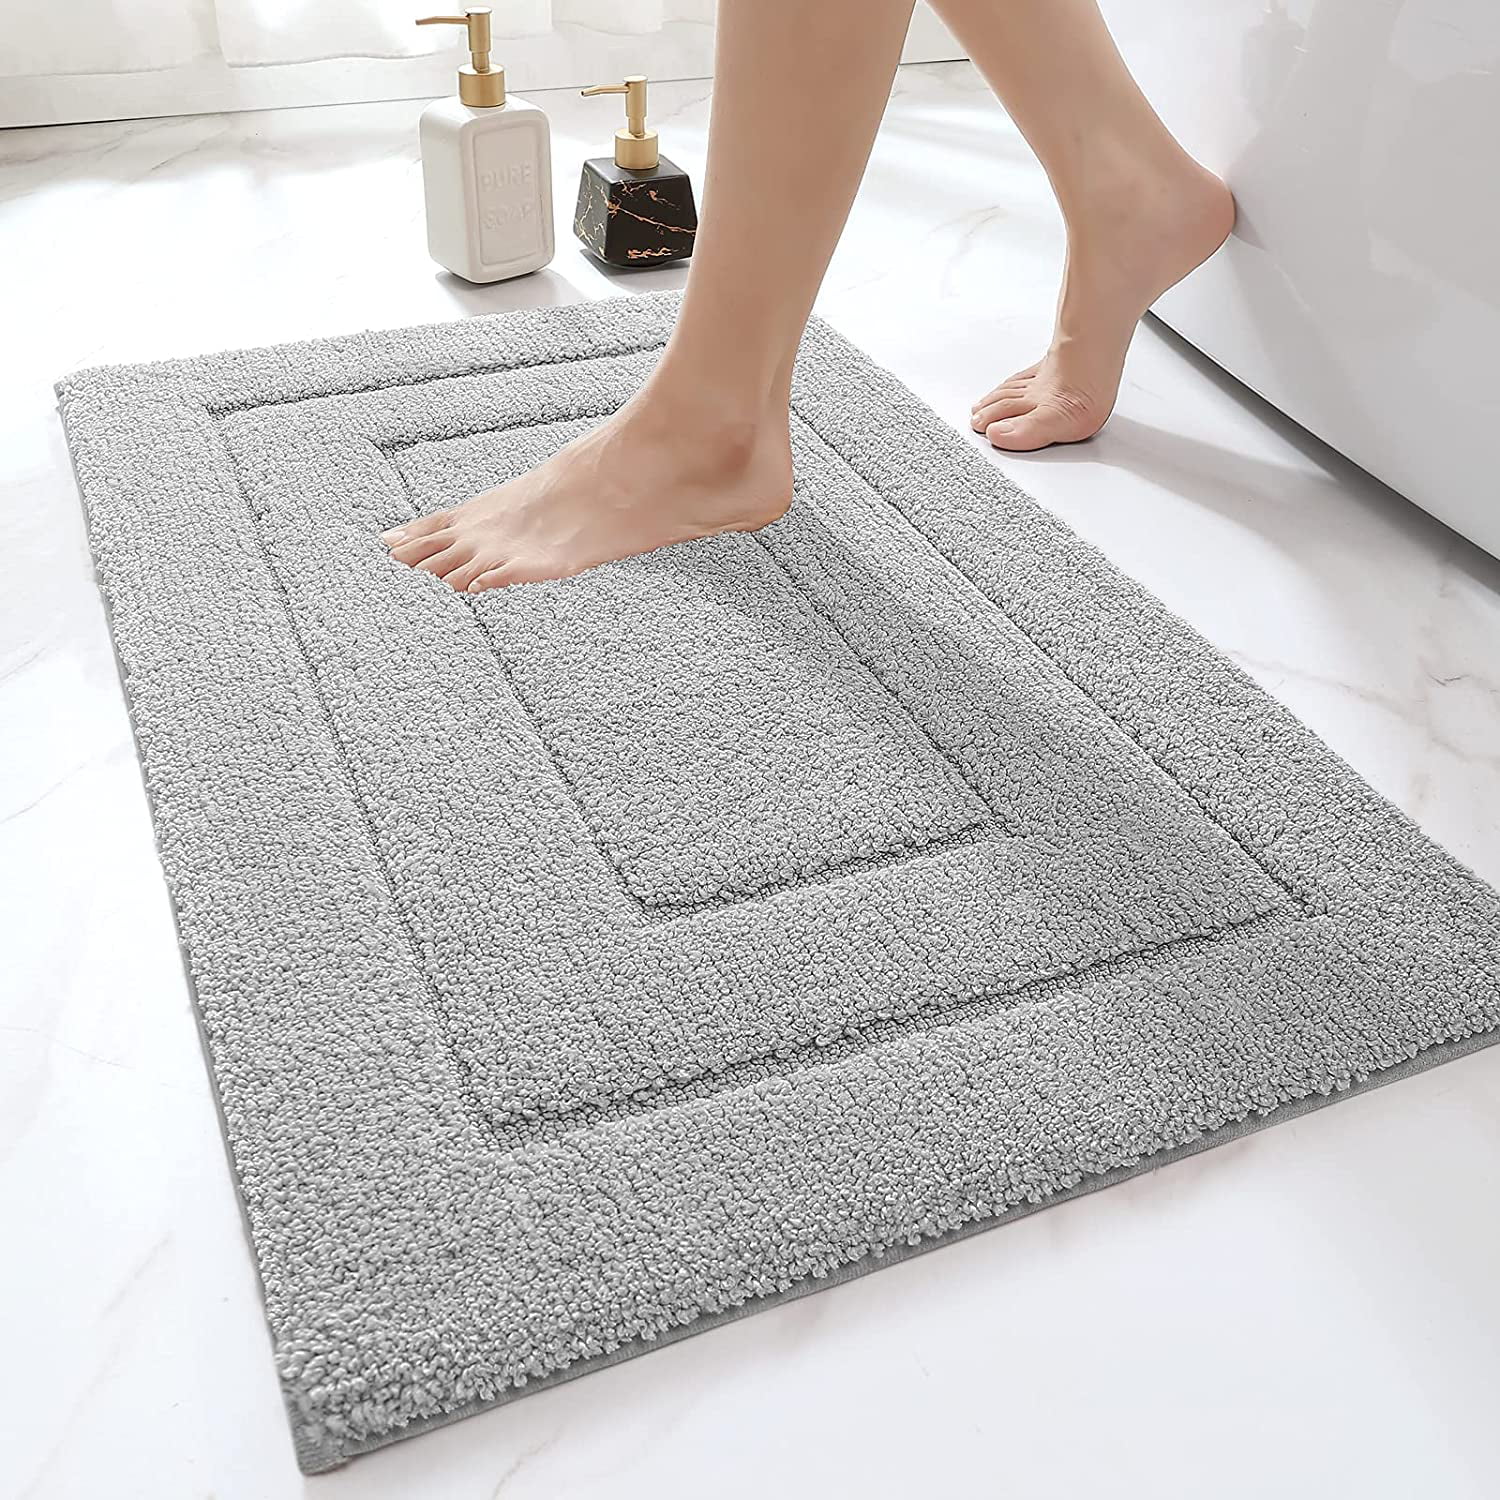 50 x 80cm Nordic Style Bathroom Rugs Machine Washable Bath Mats for Bedroom  Anti-Slip Soft Floor Mats for Living/Dining Room - Nordic 06 Wholesale